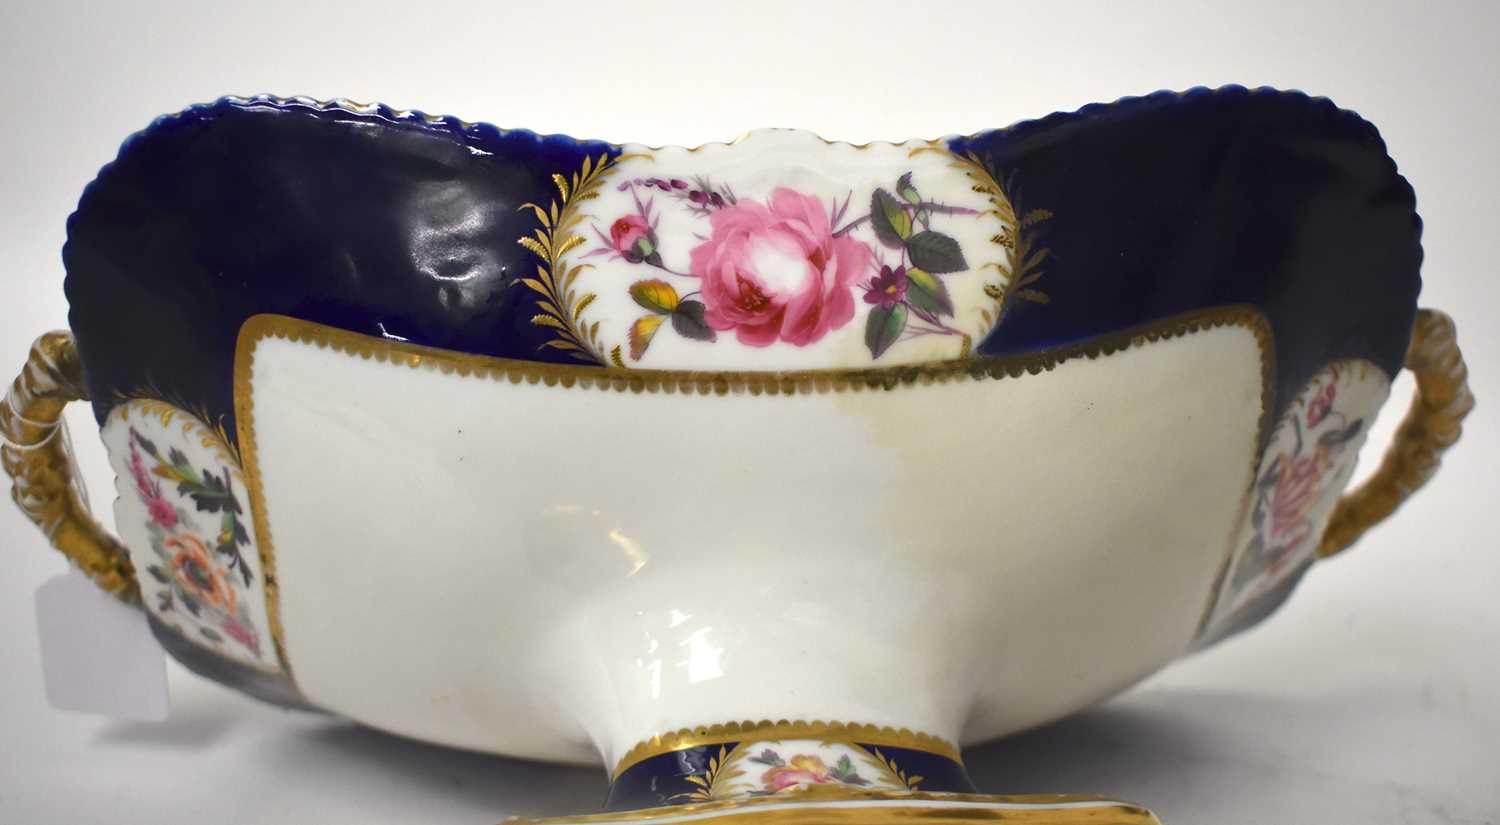 A LARGE EARLY 19TH CENTURY CHAMBERLAINS WORCESTER PORCELAIN PEDESTAL ARMORIAL COMPORT painted with - Image 9 of 12